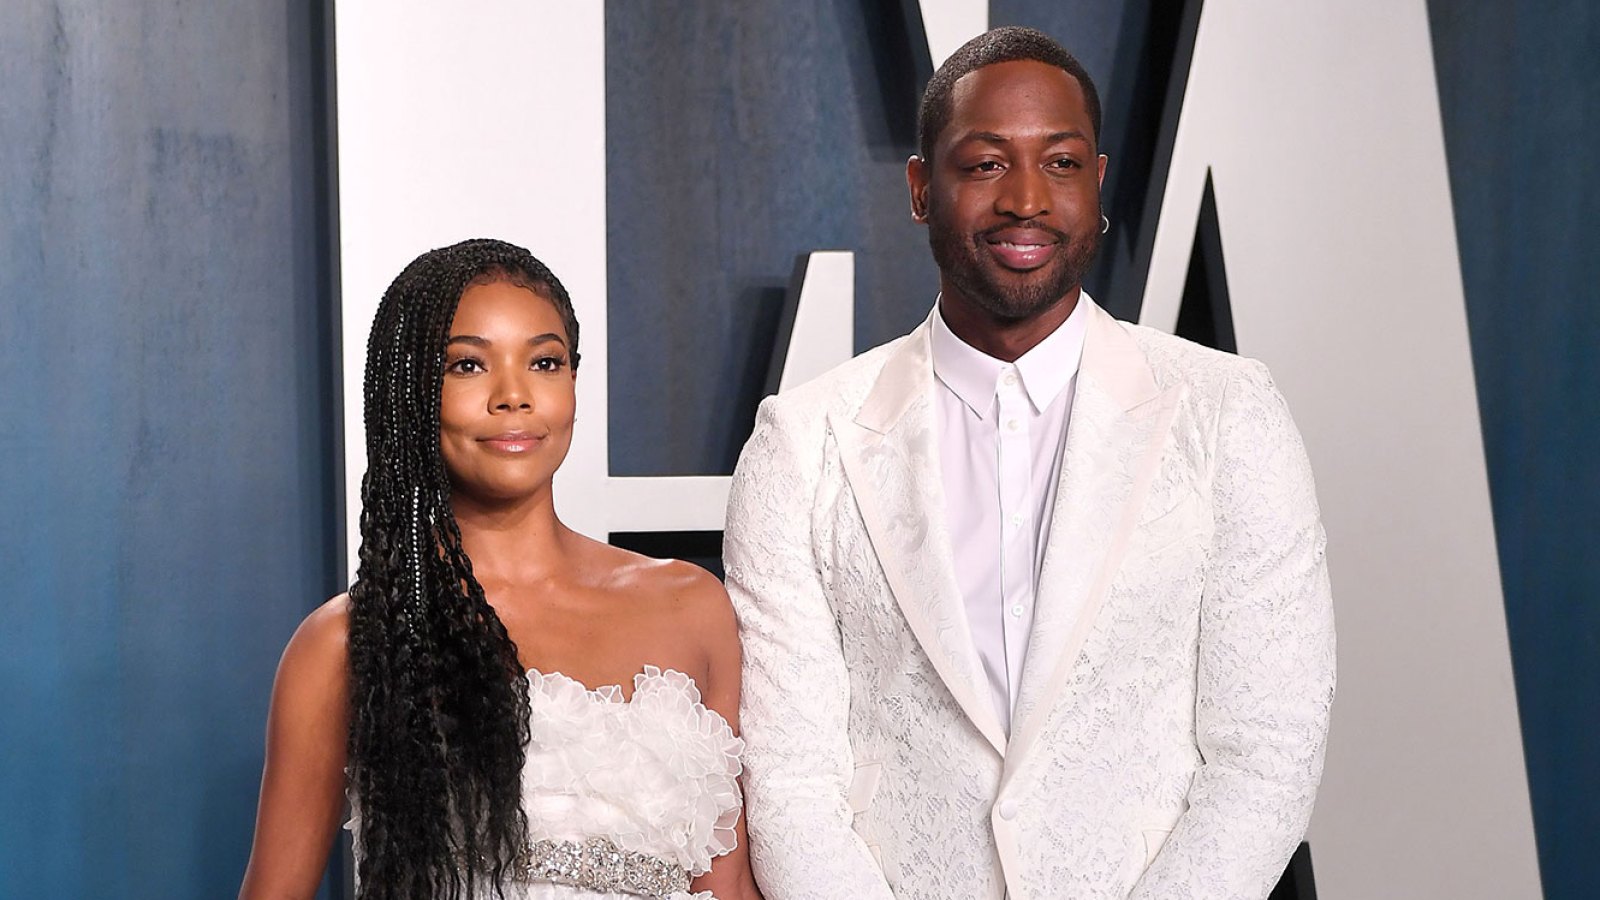 Dwyane Wade Hosts Star-Studded Party to Celebrate NBA Hall of Fame  Induction, Looks So Hot with Wife Gabrielle Union: Photo 4959977